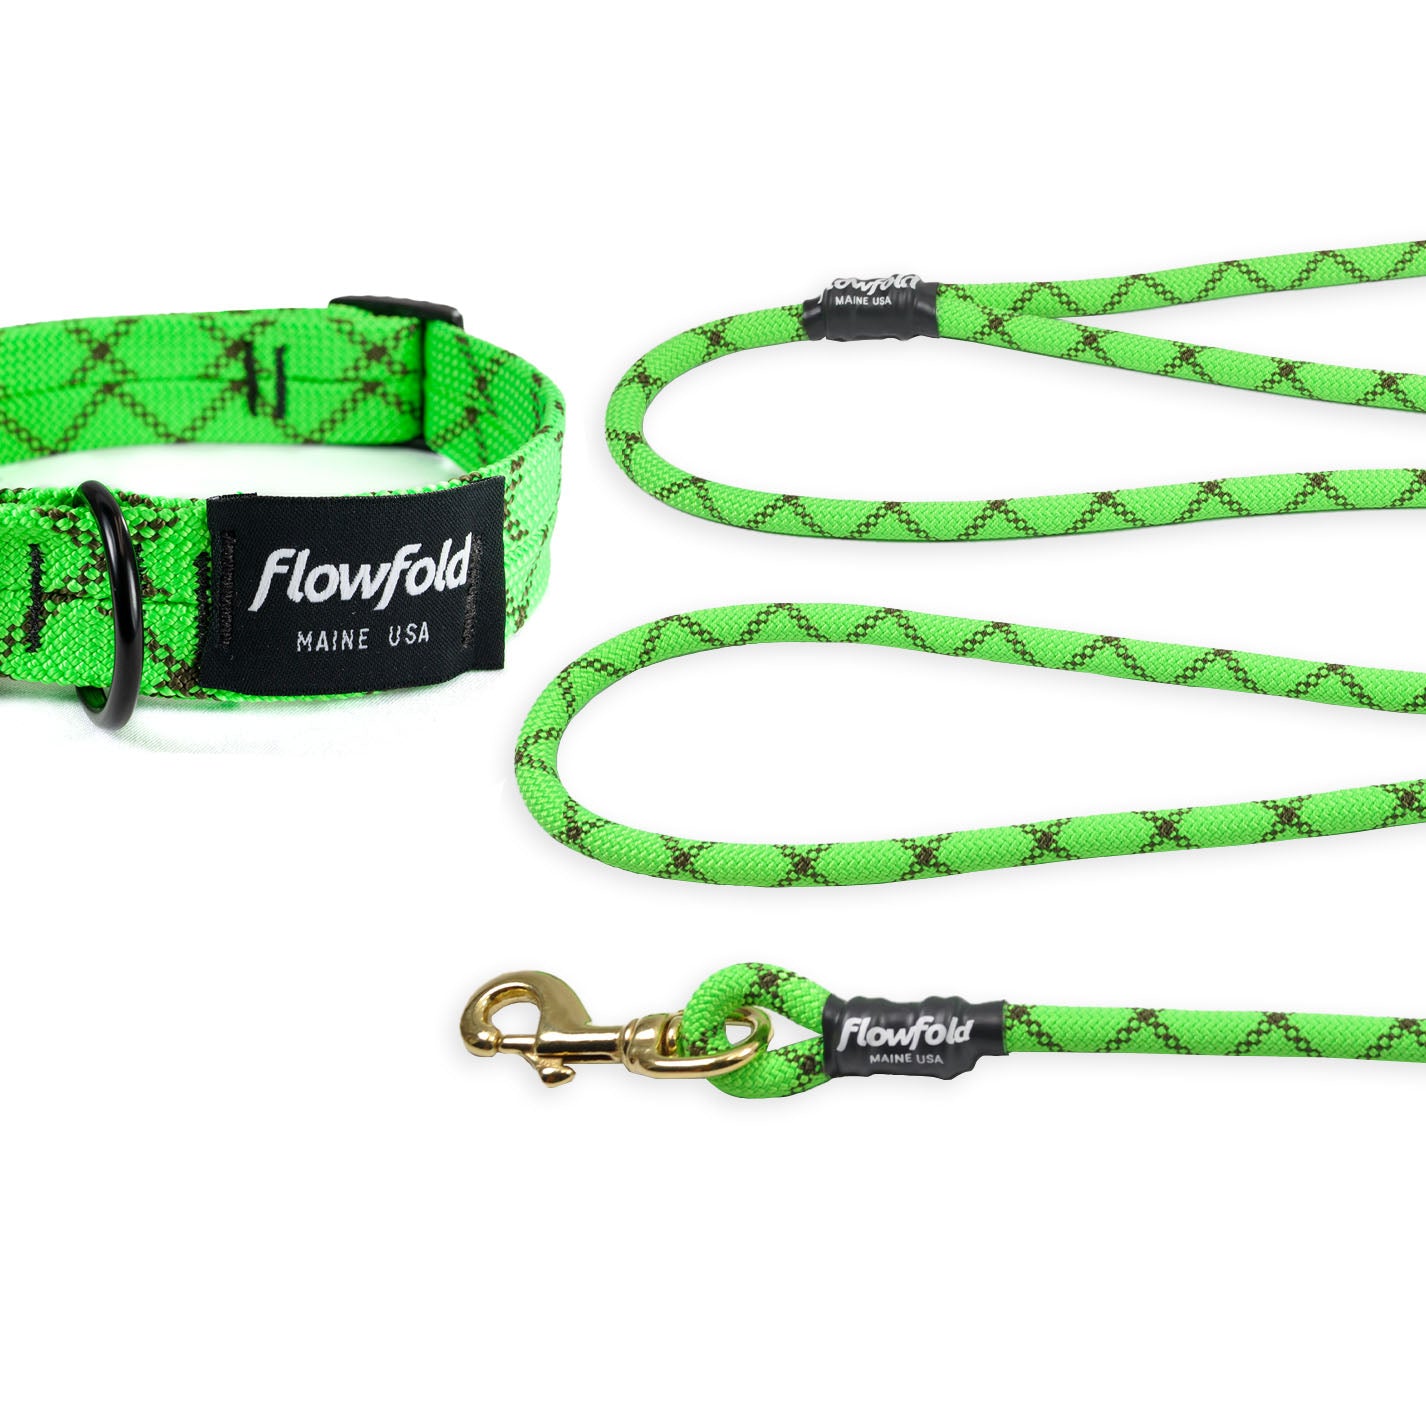 Flowfold - Recycled Climbing Rope Dog Collar - Green